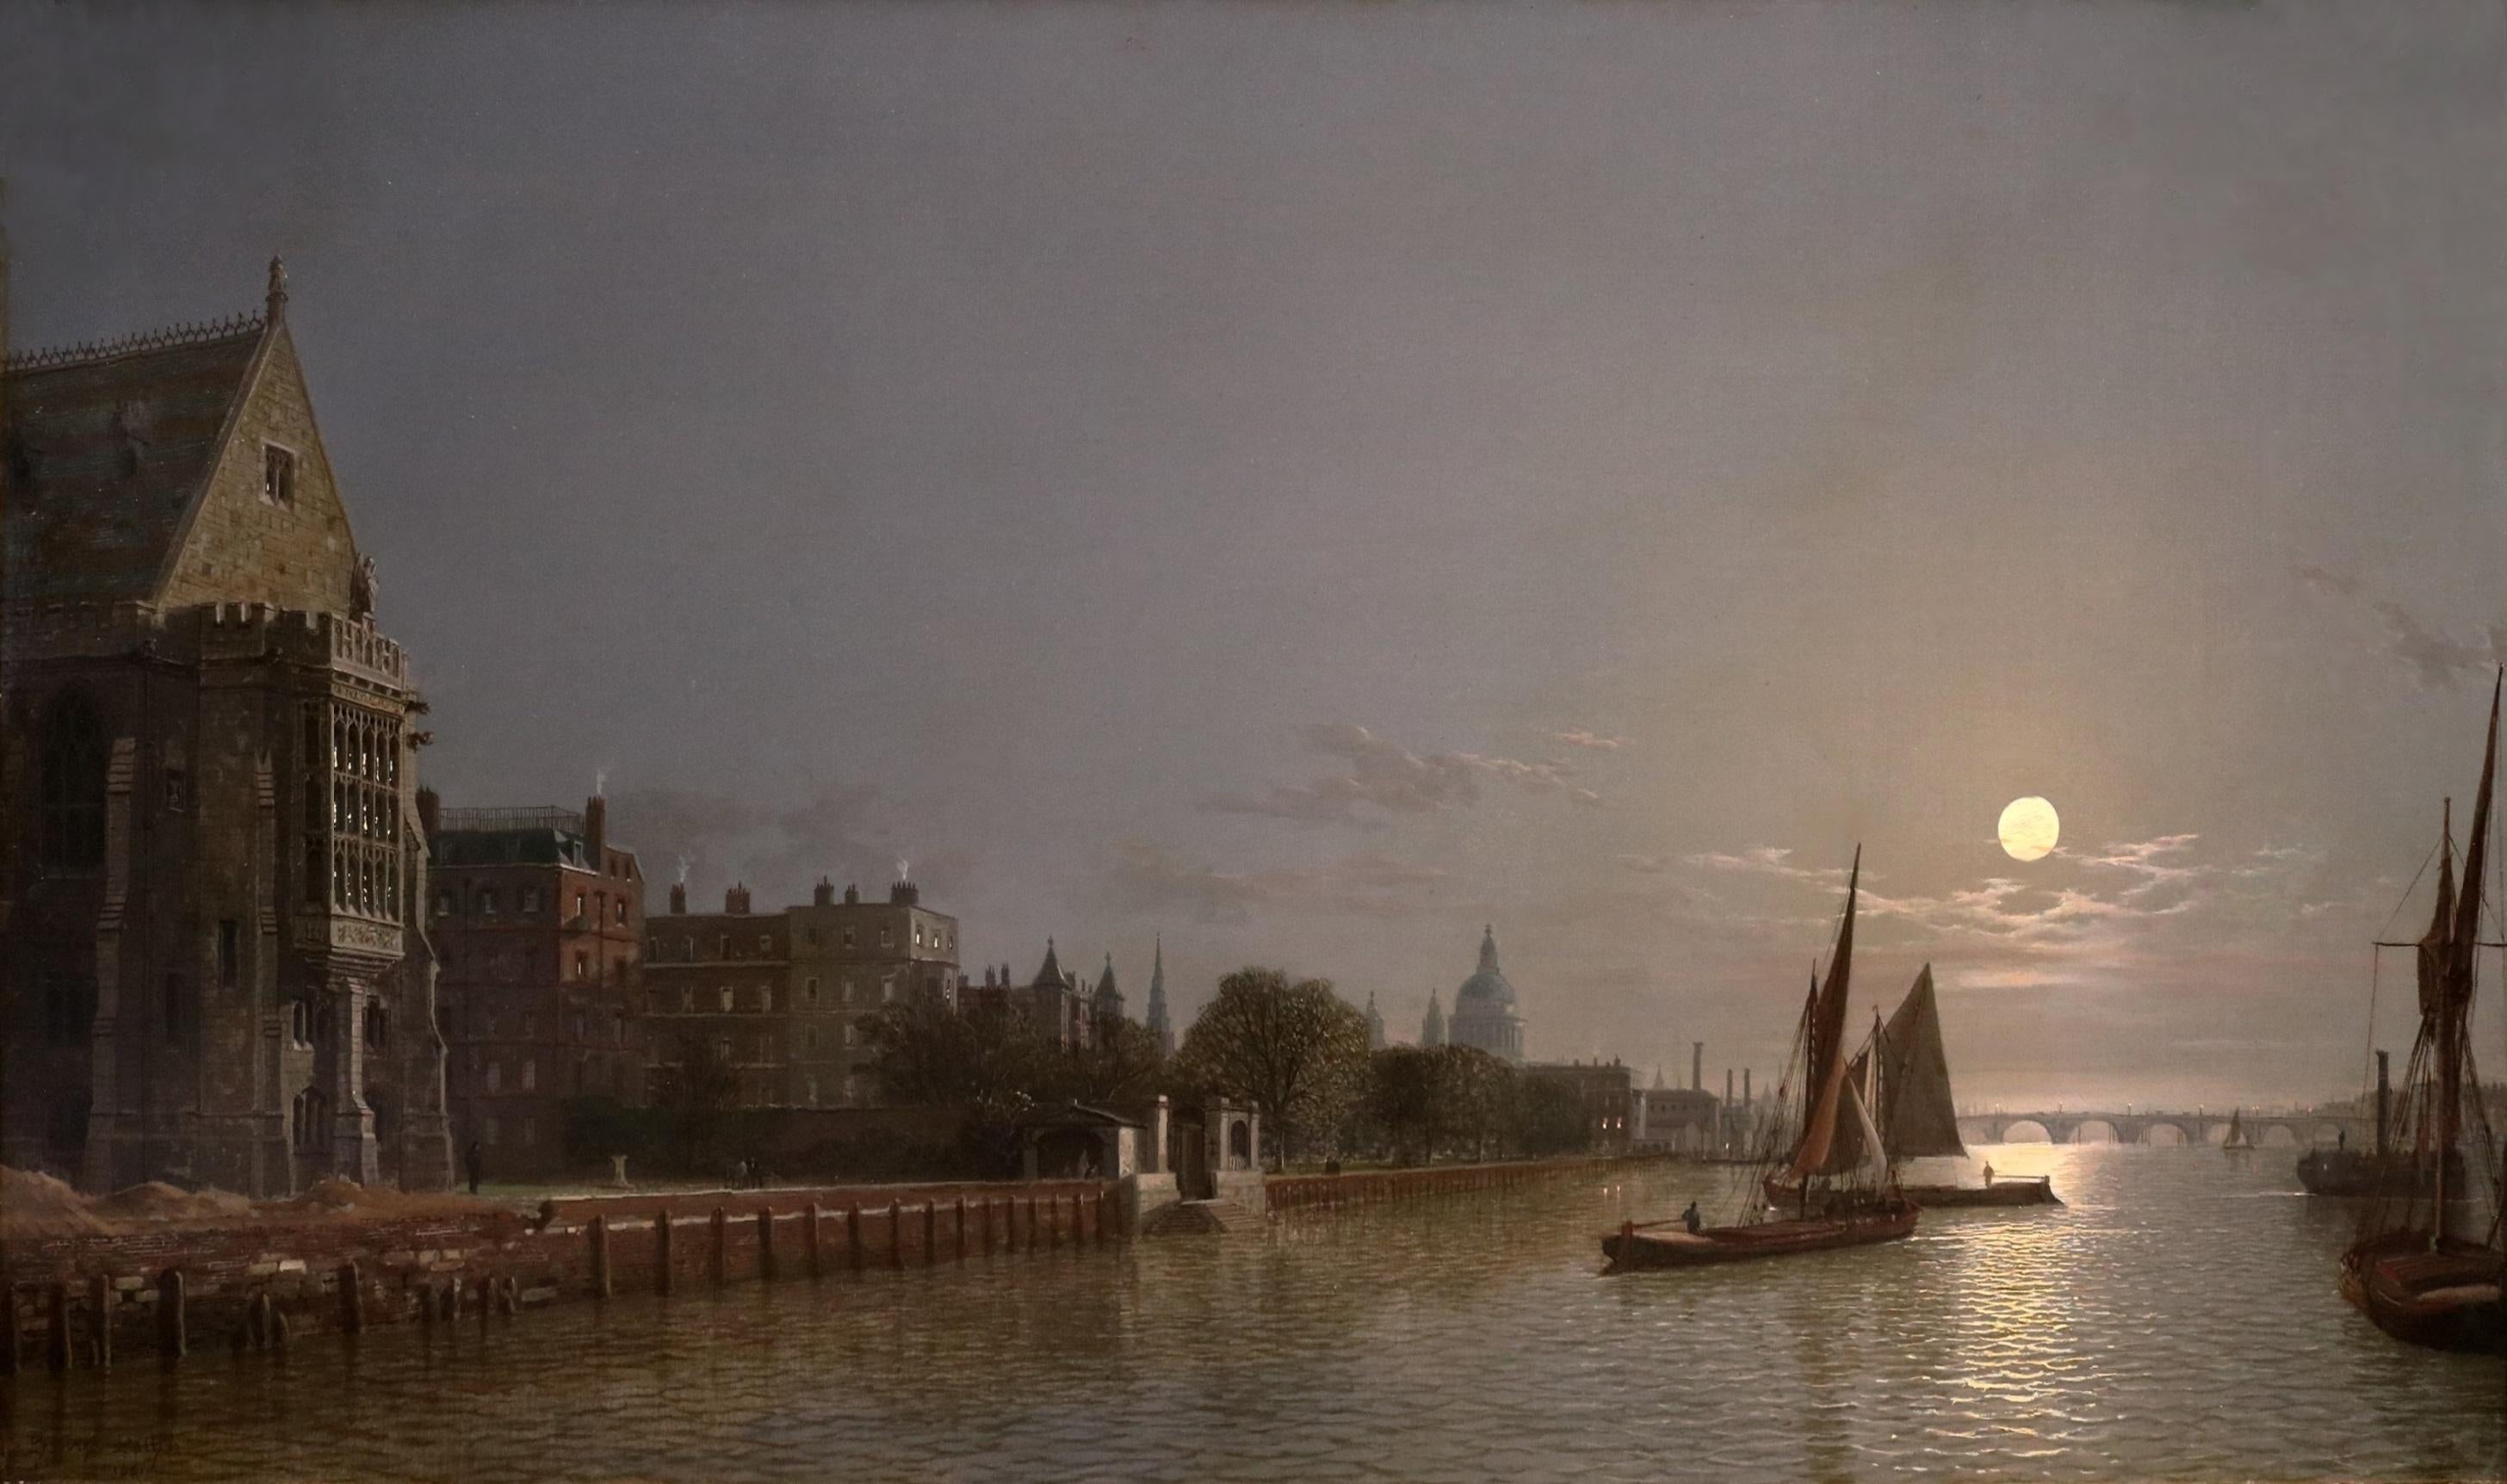 ‘The River Thames by Moonlight’ by Henry Pether (1800-1880). The painting which depicts an extensive nocturnal view of London from the Temple to St Paul’s Cathedral and Blackfriars Bridge under a full moon – is signed by the artist and dated 1861. 